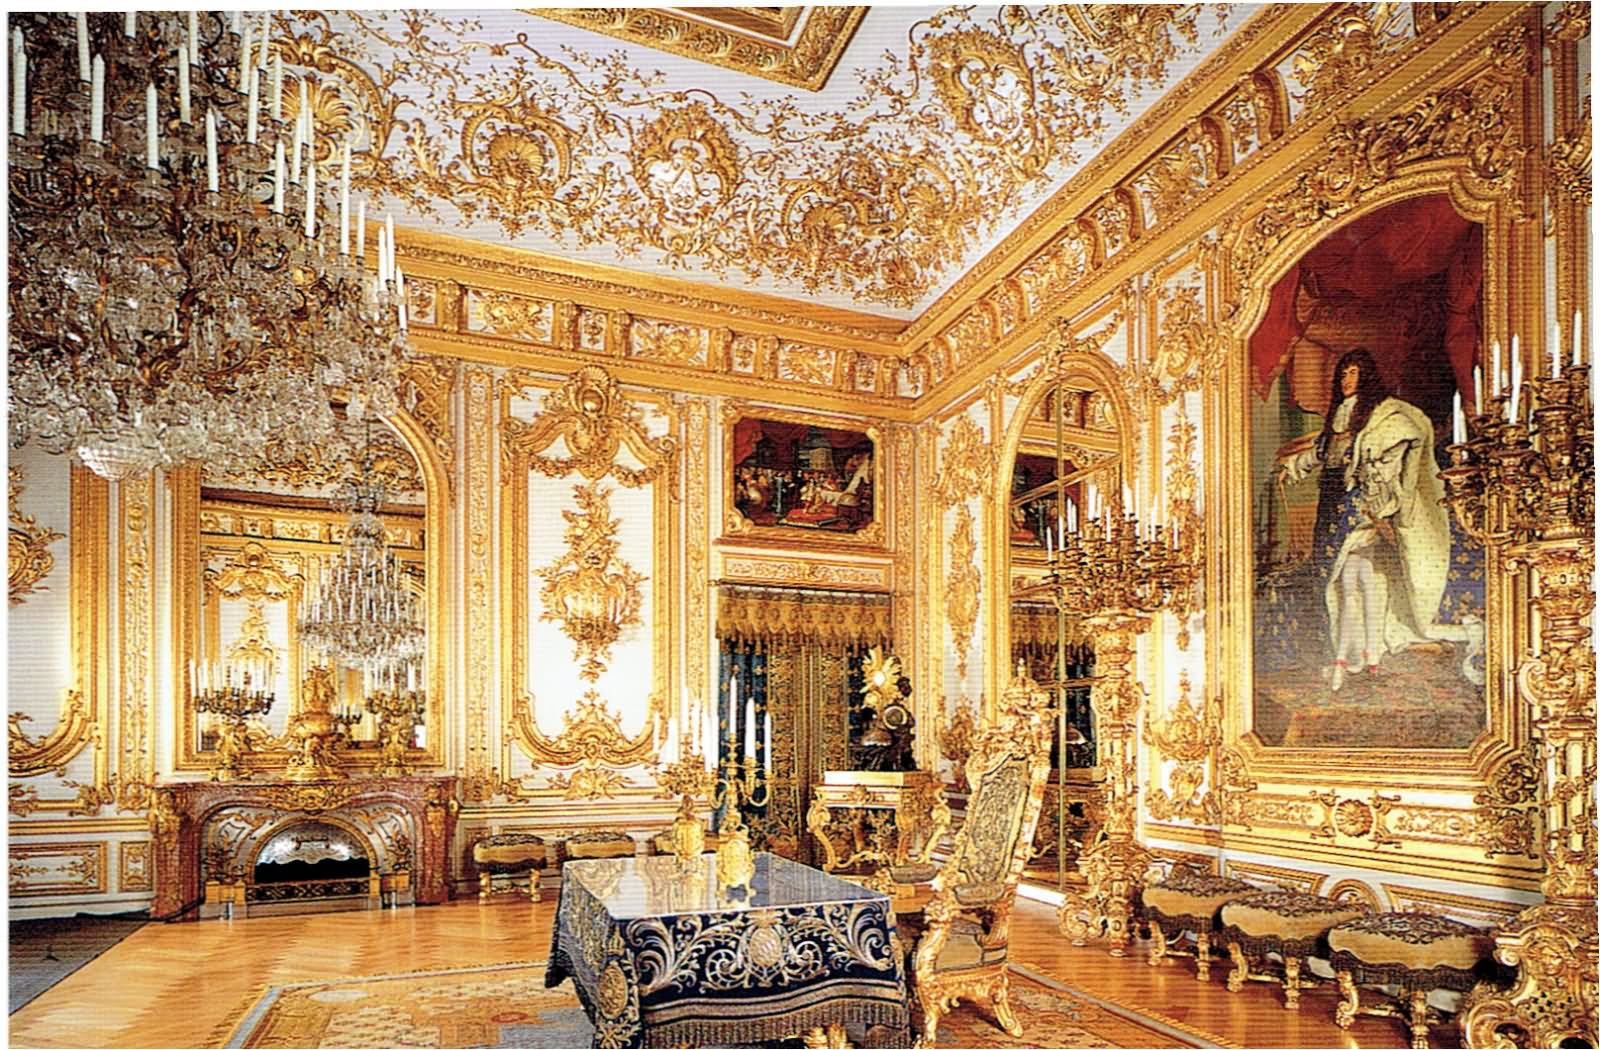 The Conference Room Inside The Linderhof Palace